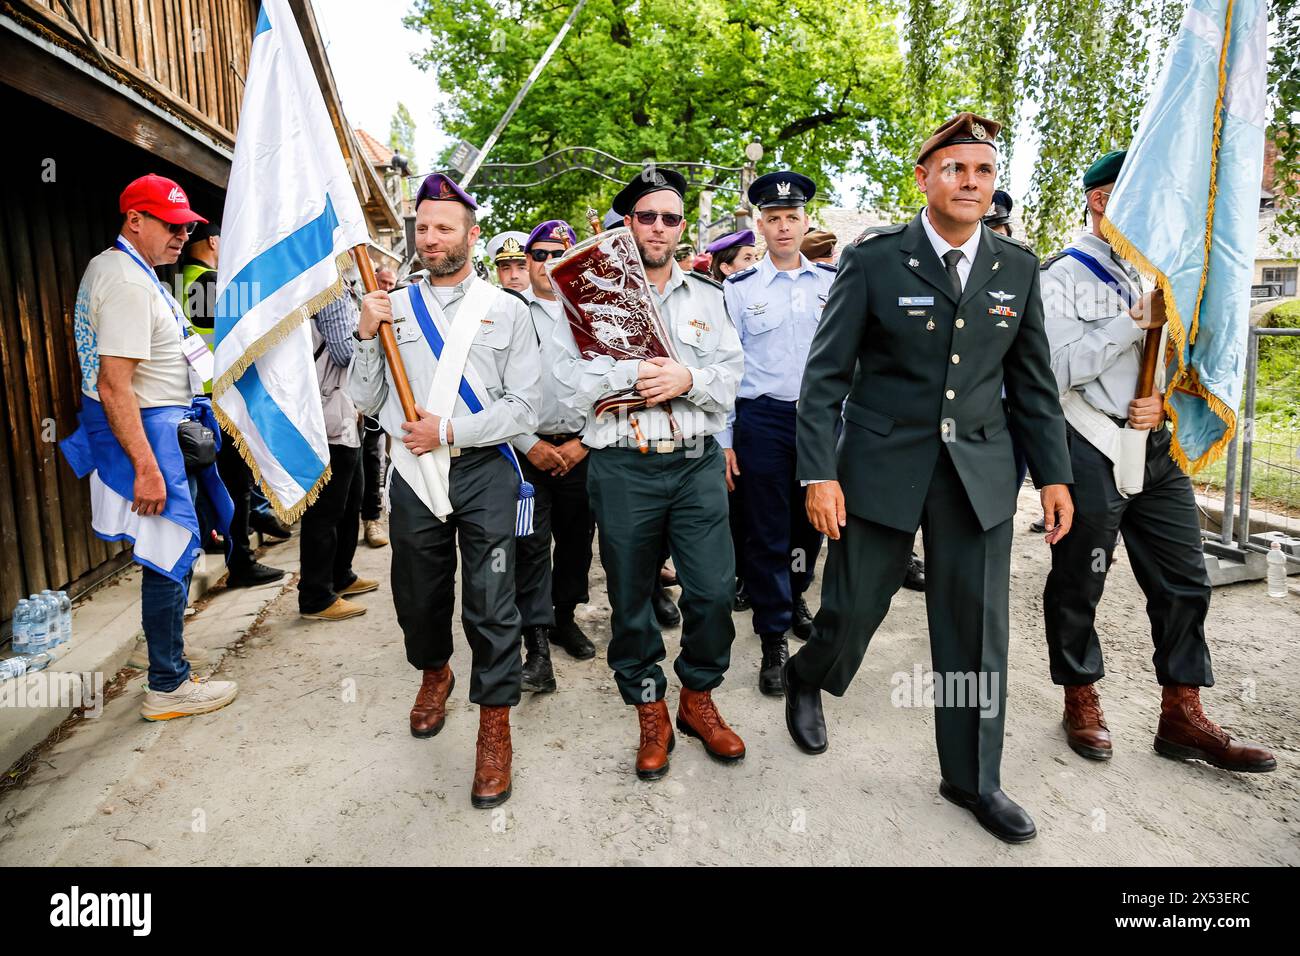 Israeli military walk in the March of the Living 2024 at Auschwitz Camp gate 'Work Makes you Free', with 55 holocaust survivors participating. Holocaust survivors and October 7th survivors attend the March of the Living together with a delegation from, among others, the United States, Canada, Italy, United Kingdom. On Holocaust Memorial Day observed in the Jewish calendar (Yom HaShoah), thousands of participants march silently from Auschwitz to Birkenau. The march has an educational and remembrance purpose. This year's March was highly politicized due to the Israeli war in Occupied Palestine. Stock Photo